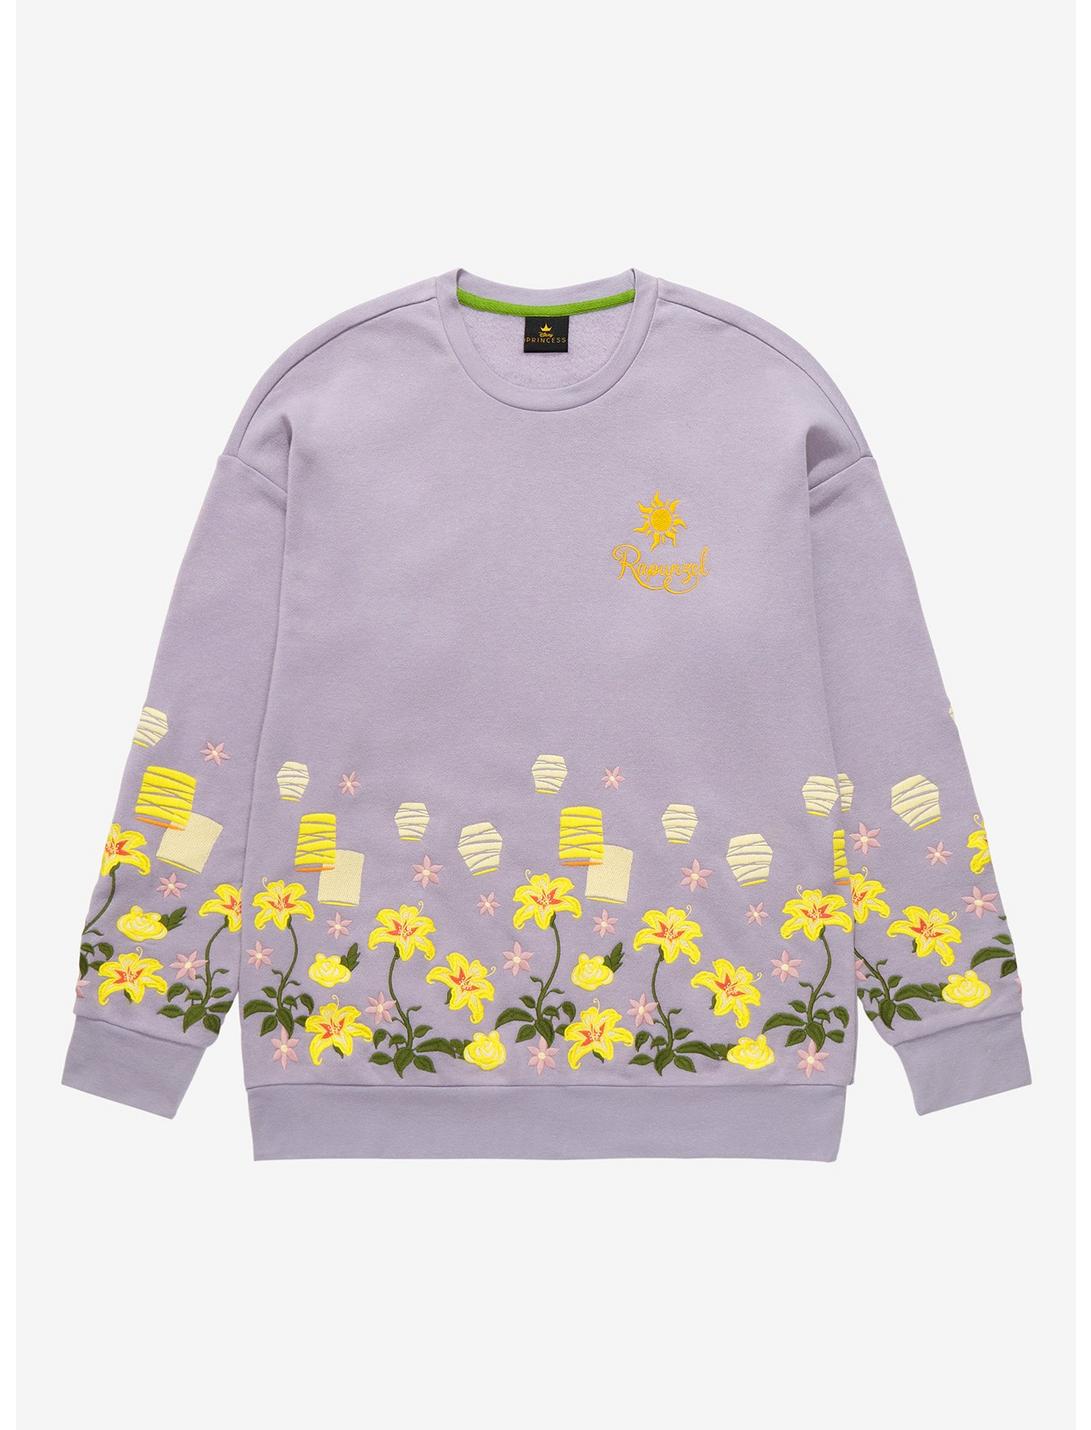 Disney Tangled Rapunzel Embroidered Crewneck - BoxLunch Exclusive , LILAC, hi-res